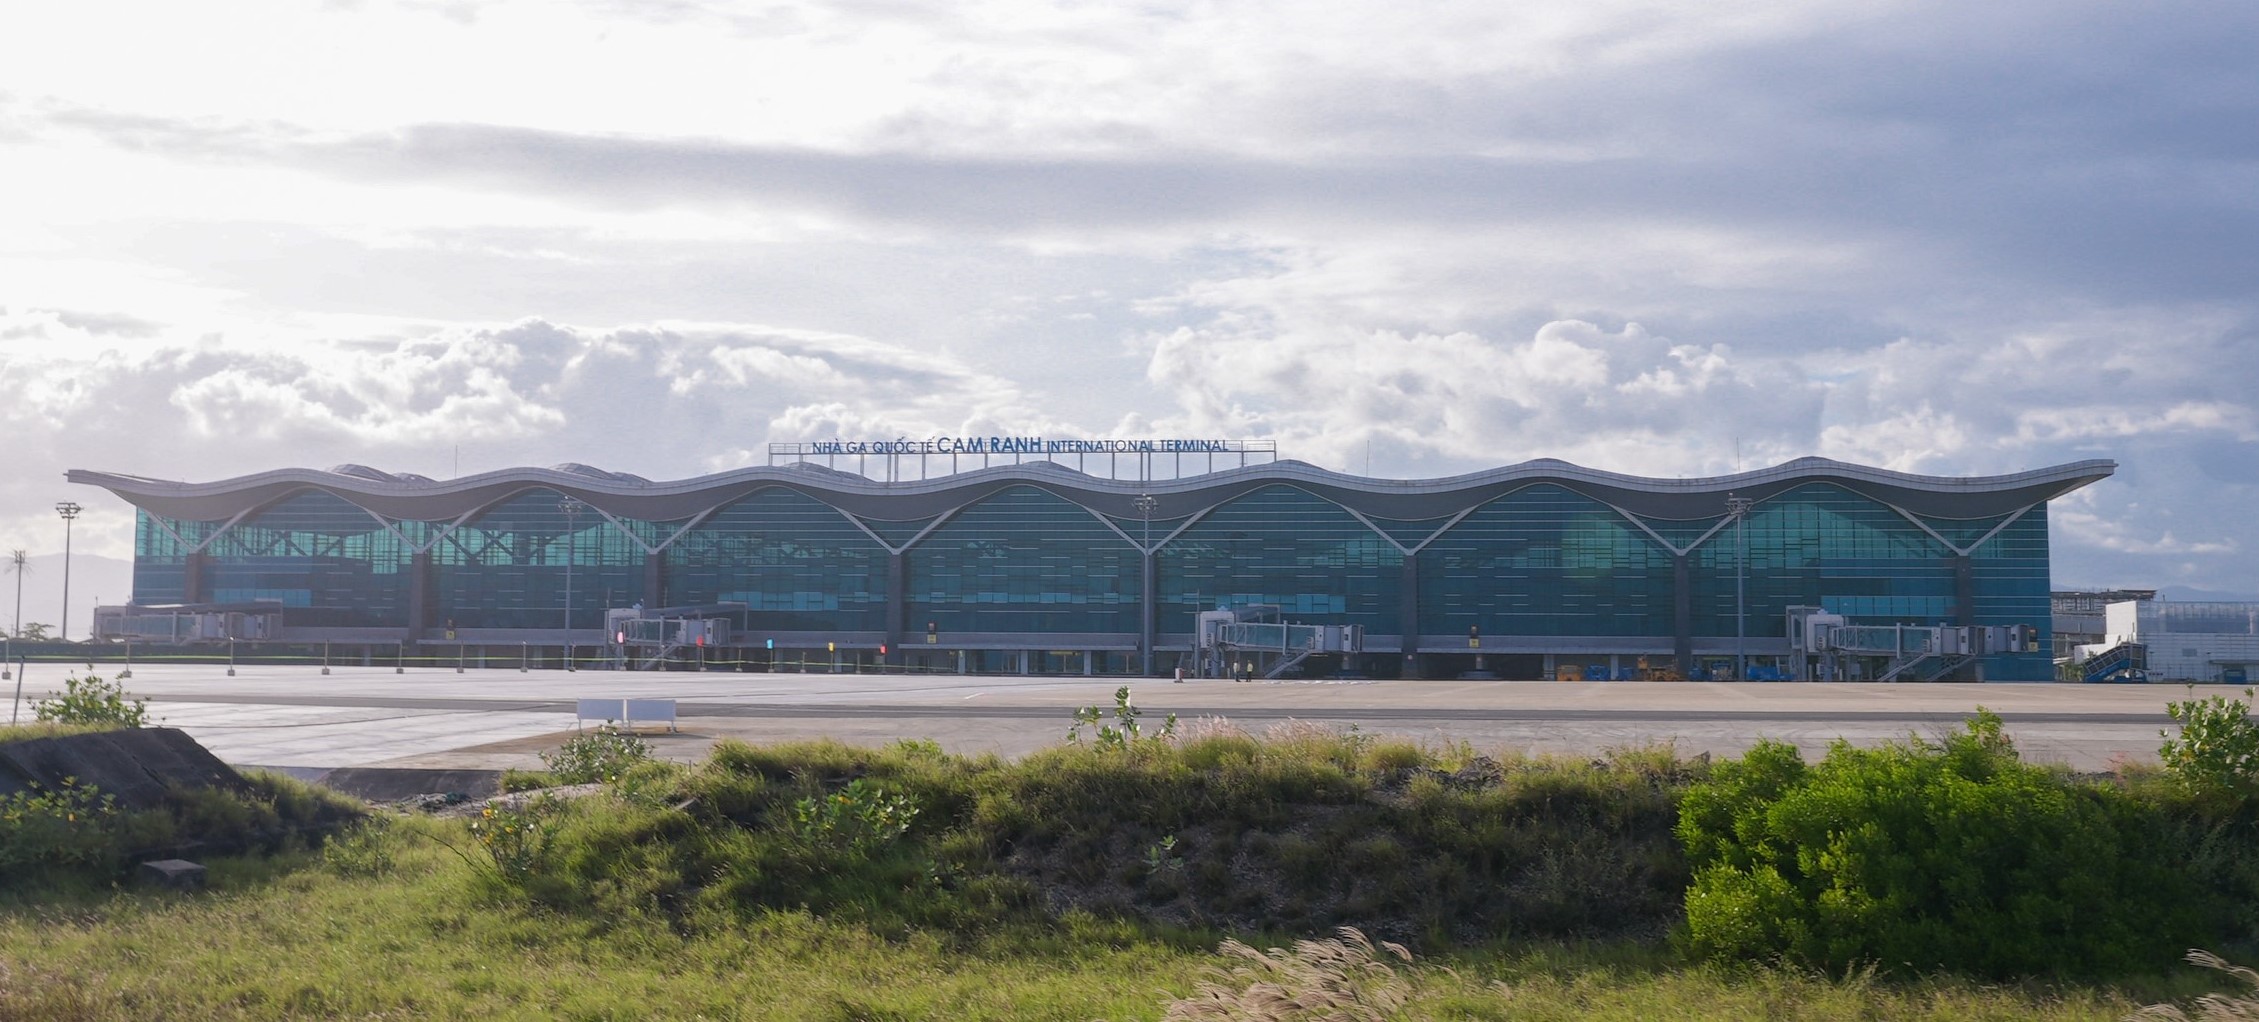 PROJECT OF RENOVATING AND UPGRADING THE CURRENT AIRPORTS (QT+QN) - CAM RANH INTERNATIONAL AIRPORT